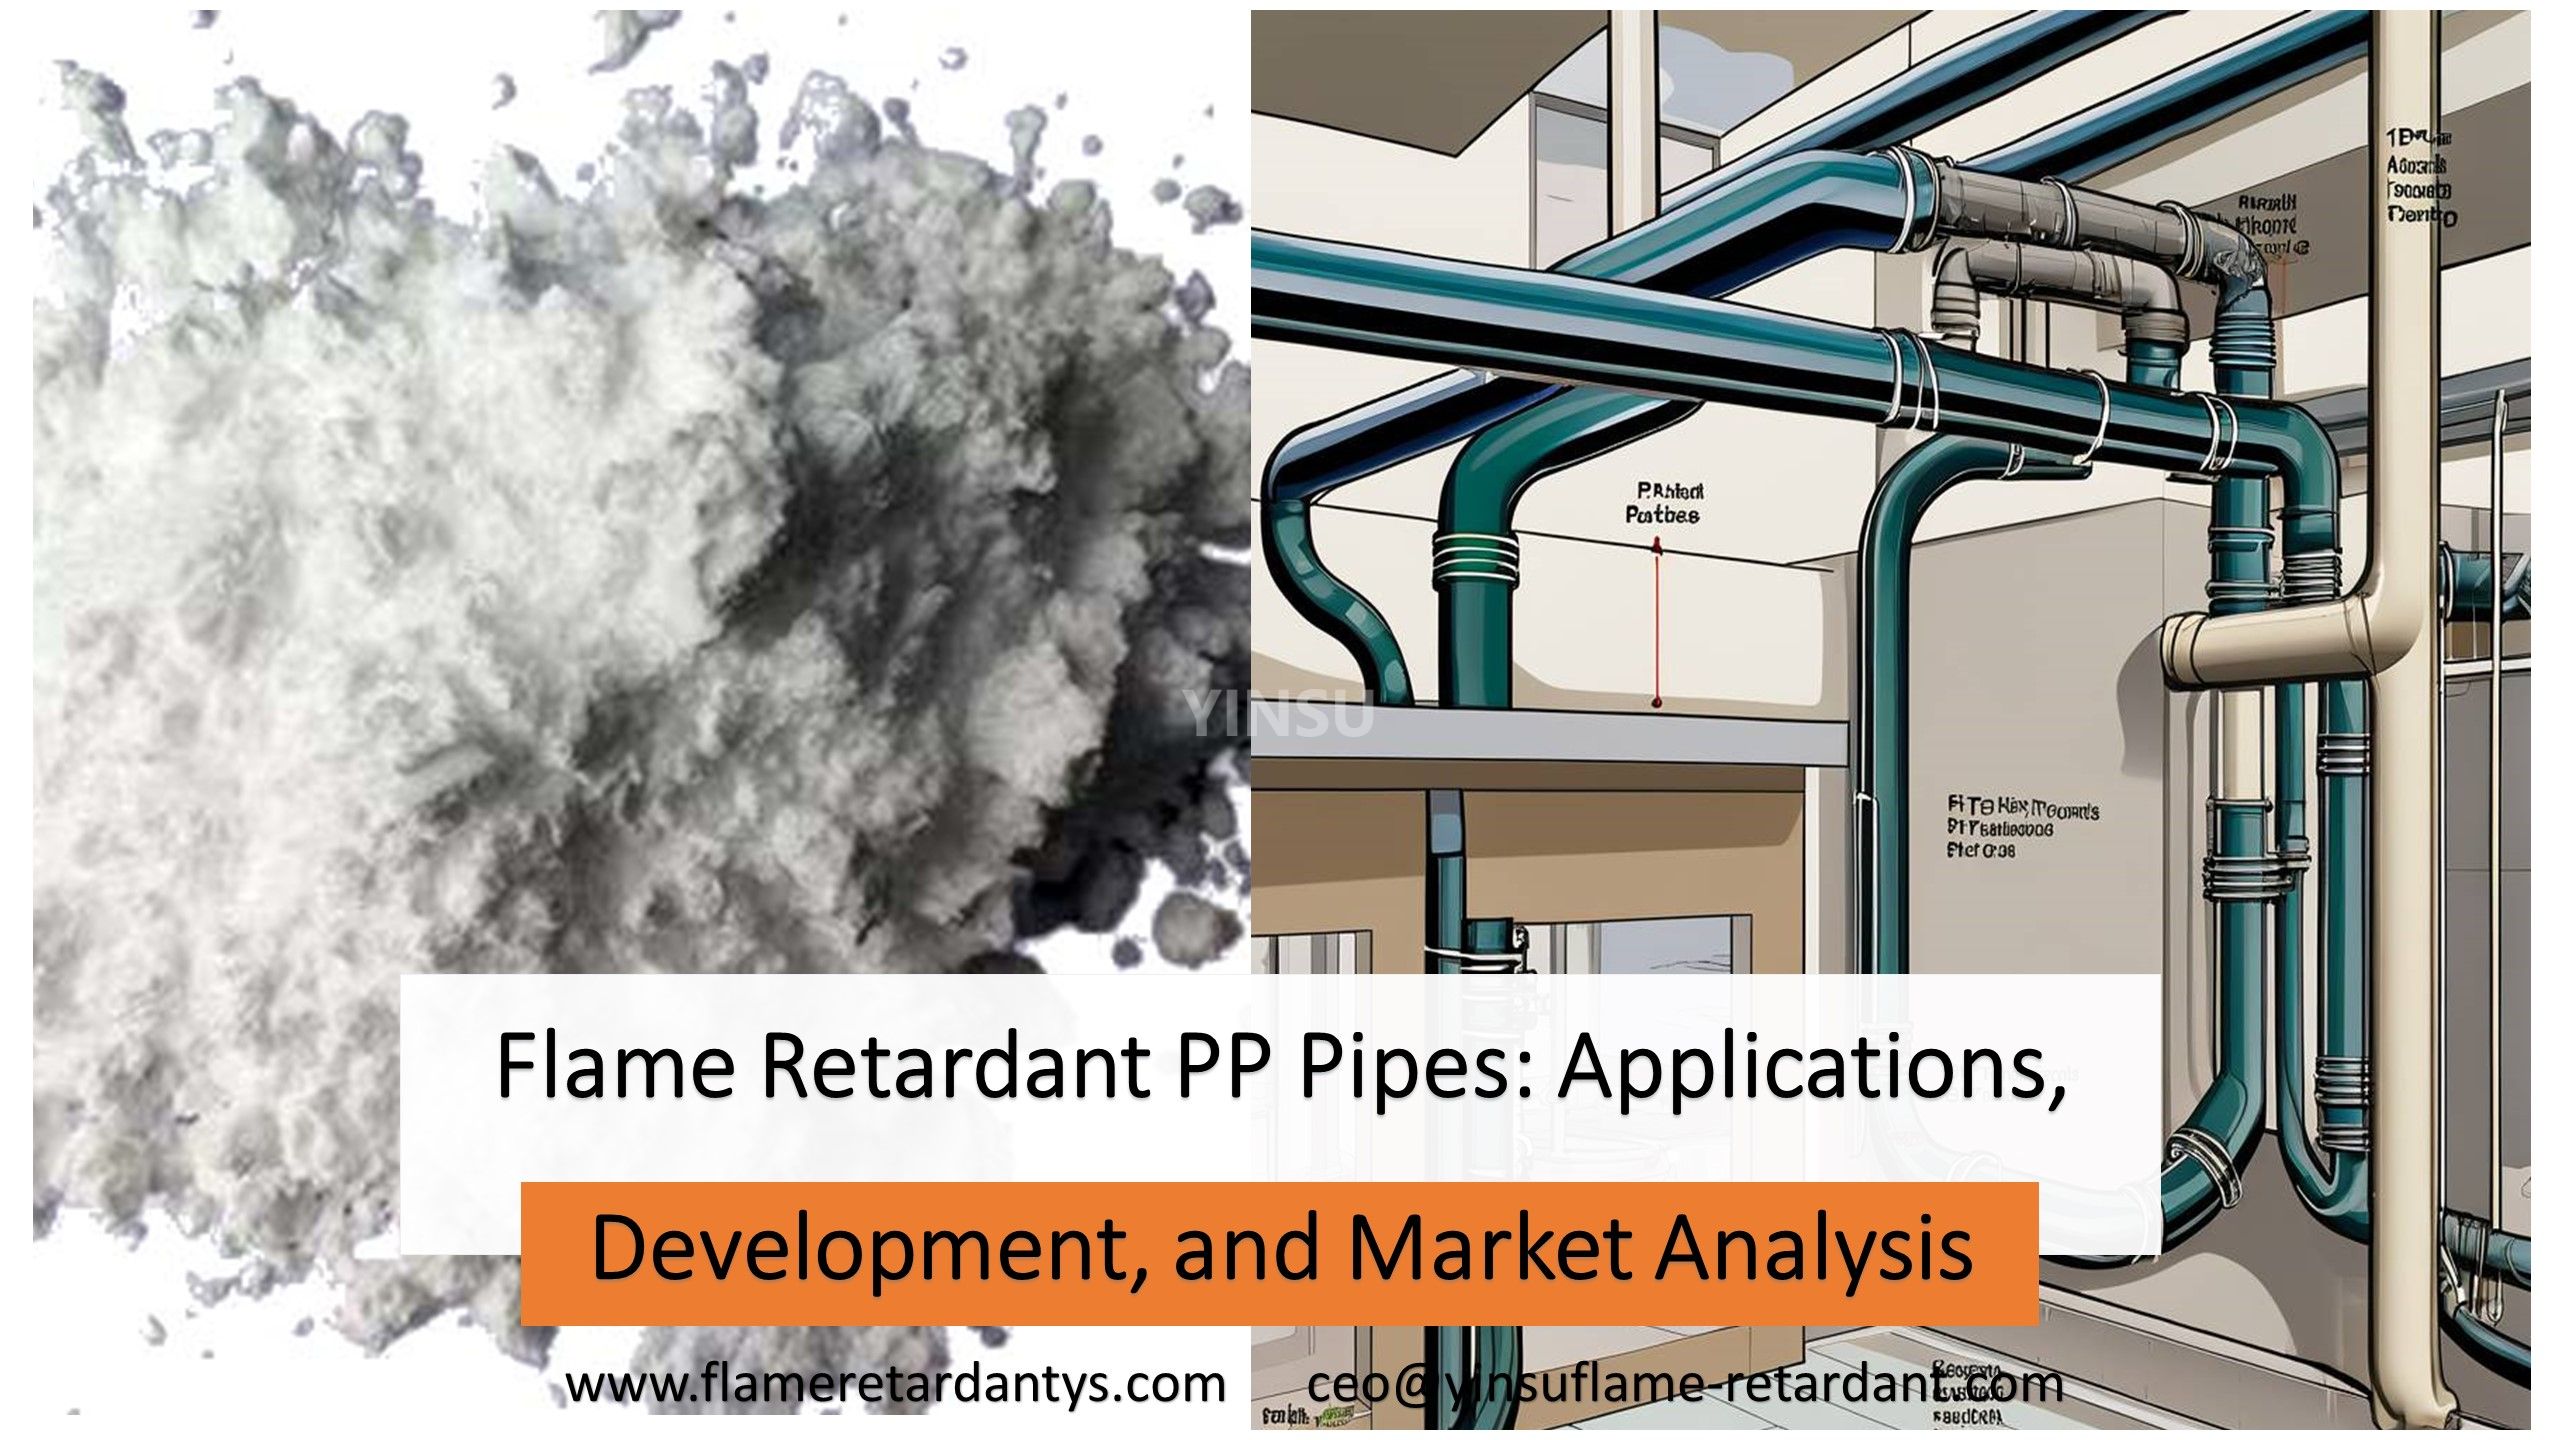 Flame Retardant PP Pipes Applications, Development, and Market Analysis